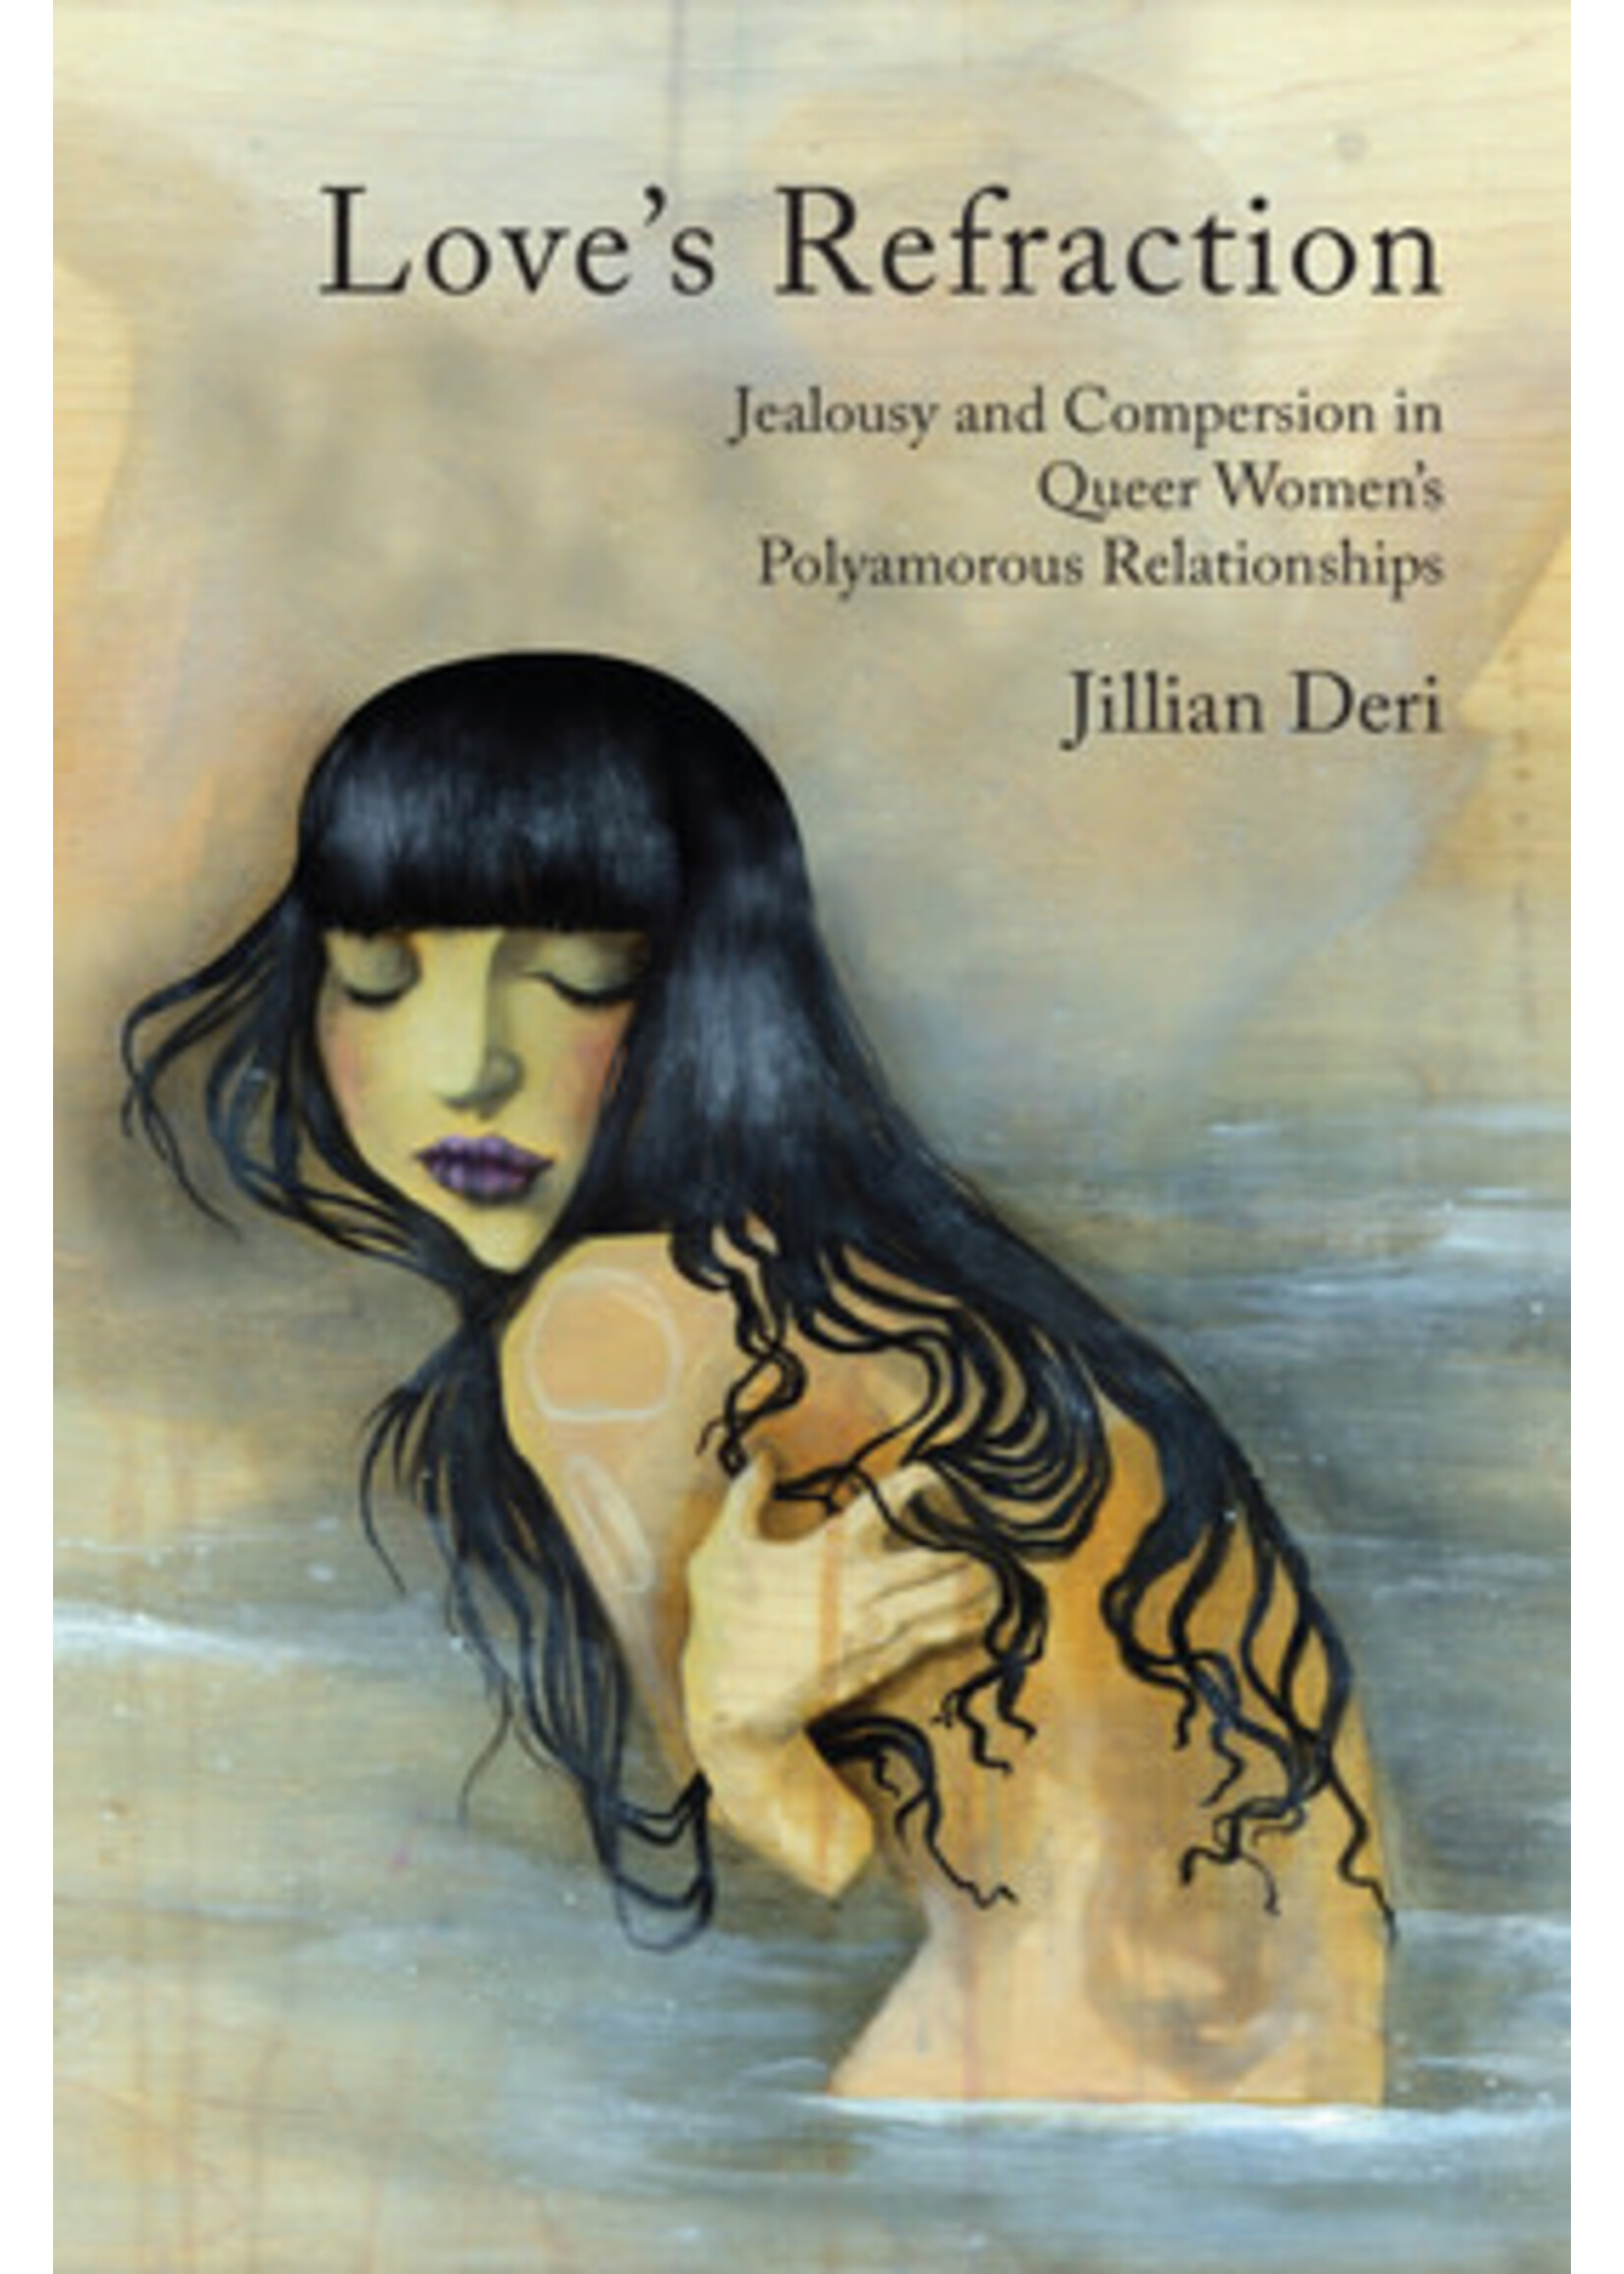 Love's Refraction: Jealousy and Compersion in Queer Women's Polyamorous Relationships by Jillian Deri